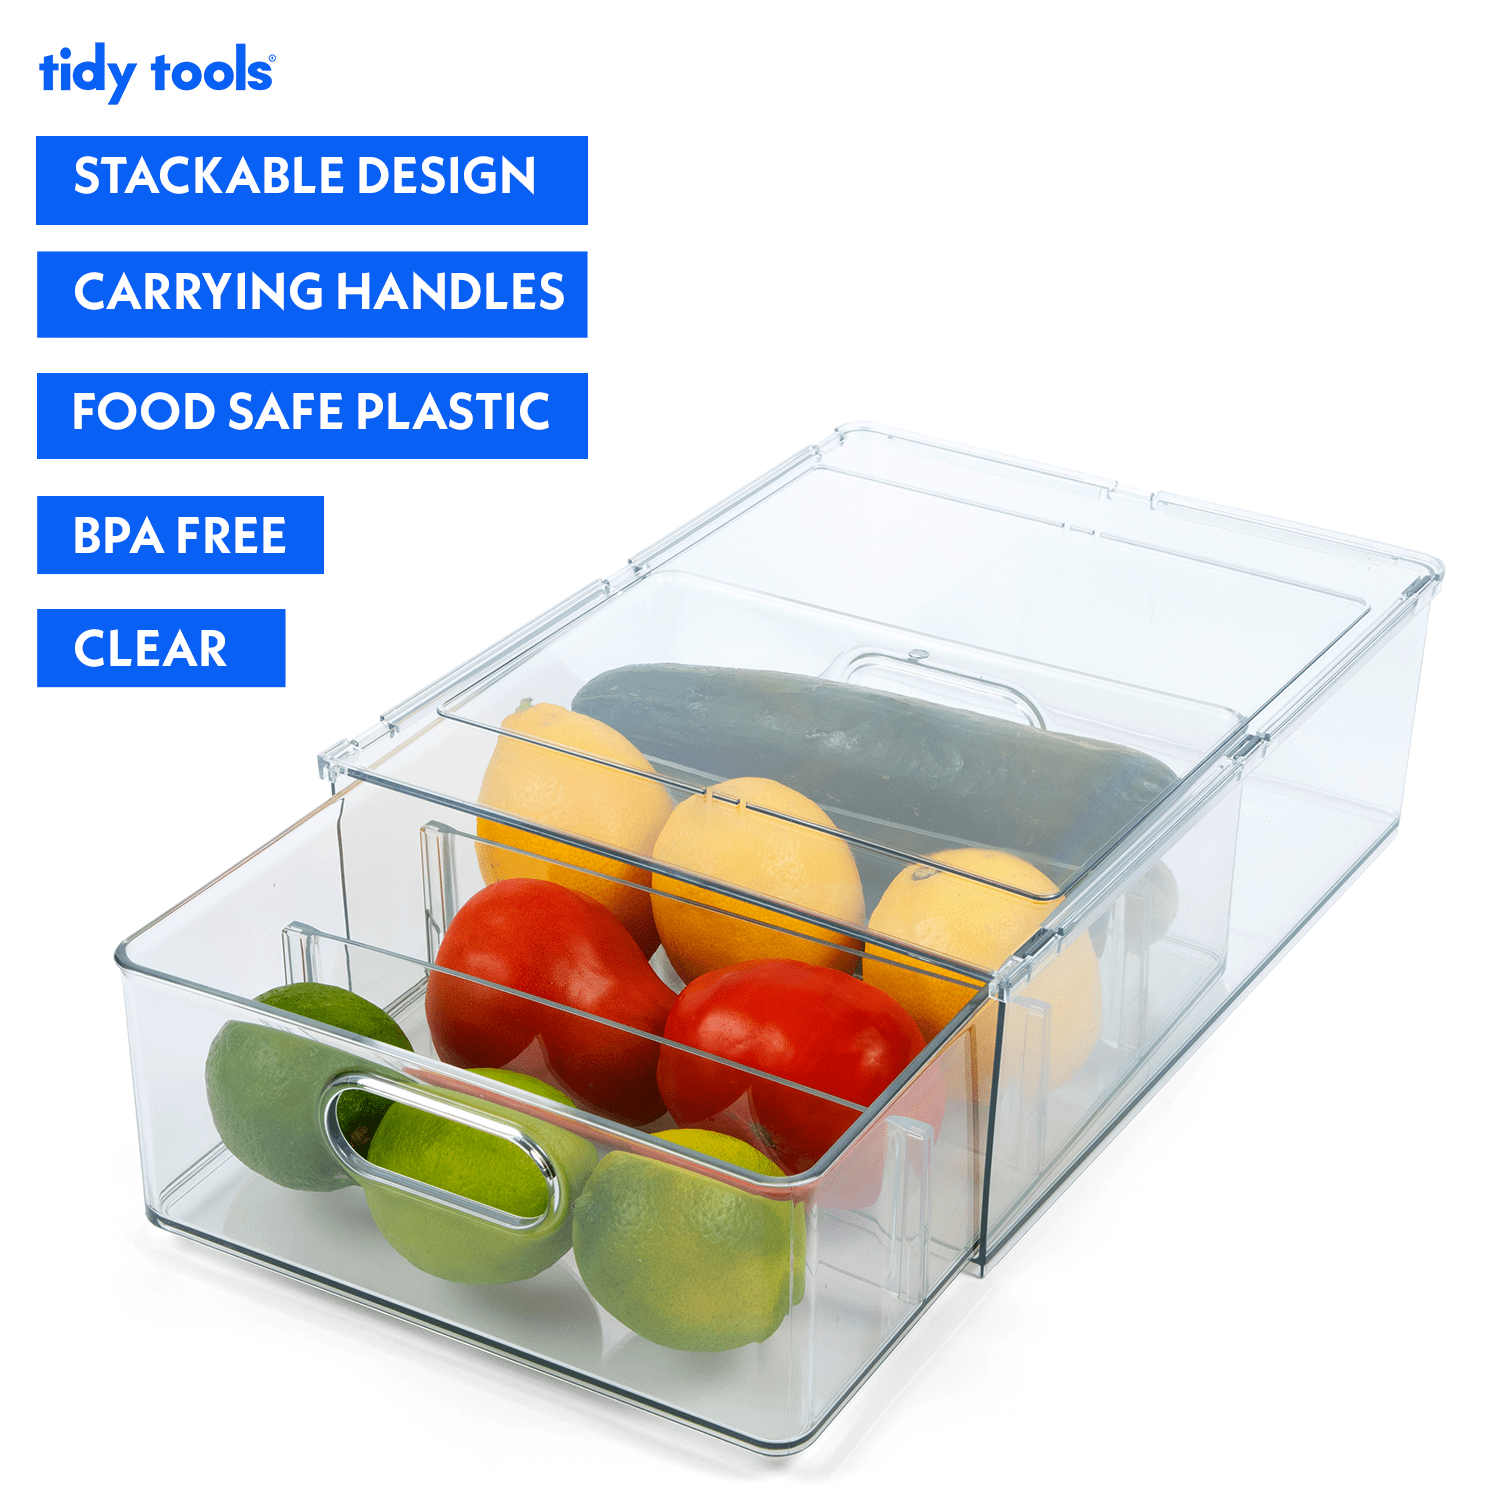 Tidy Tools Plastic Organizer Bins with Pull-out Drawer and Dividers